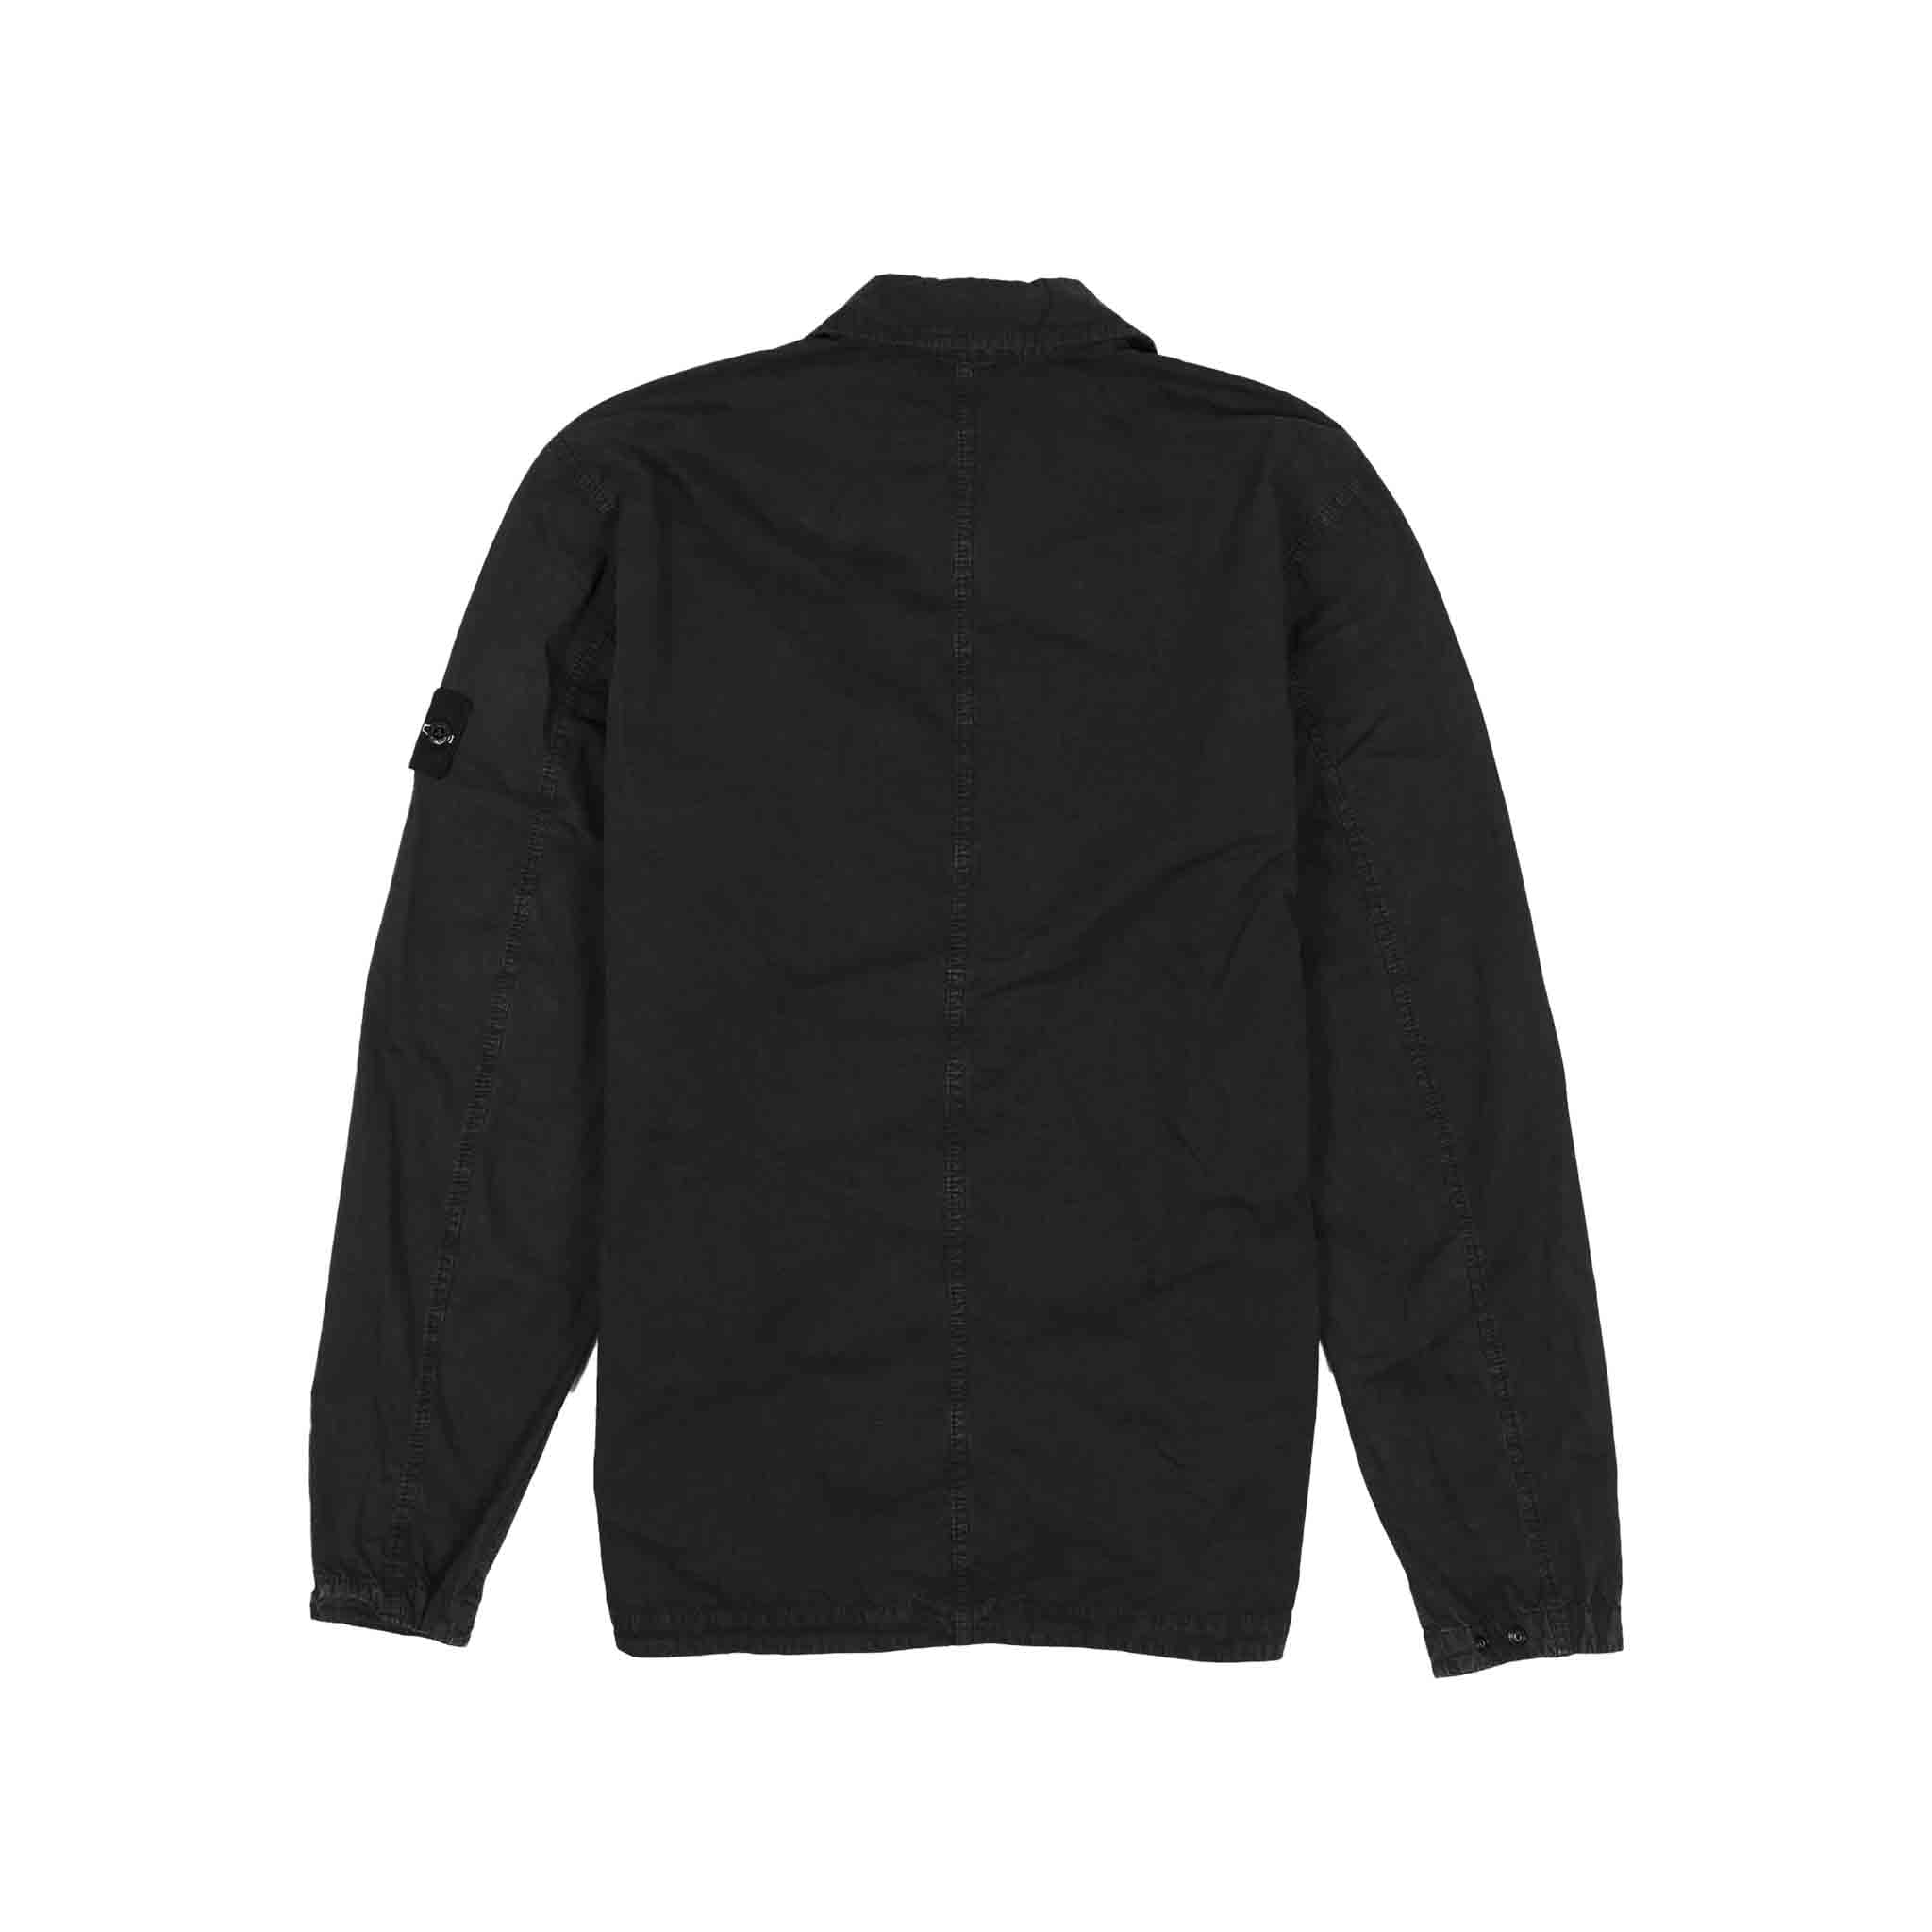 Stone Island Garment Dyed "Old" Treatment Cotton Overshirt in Black